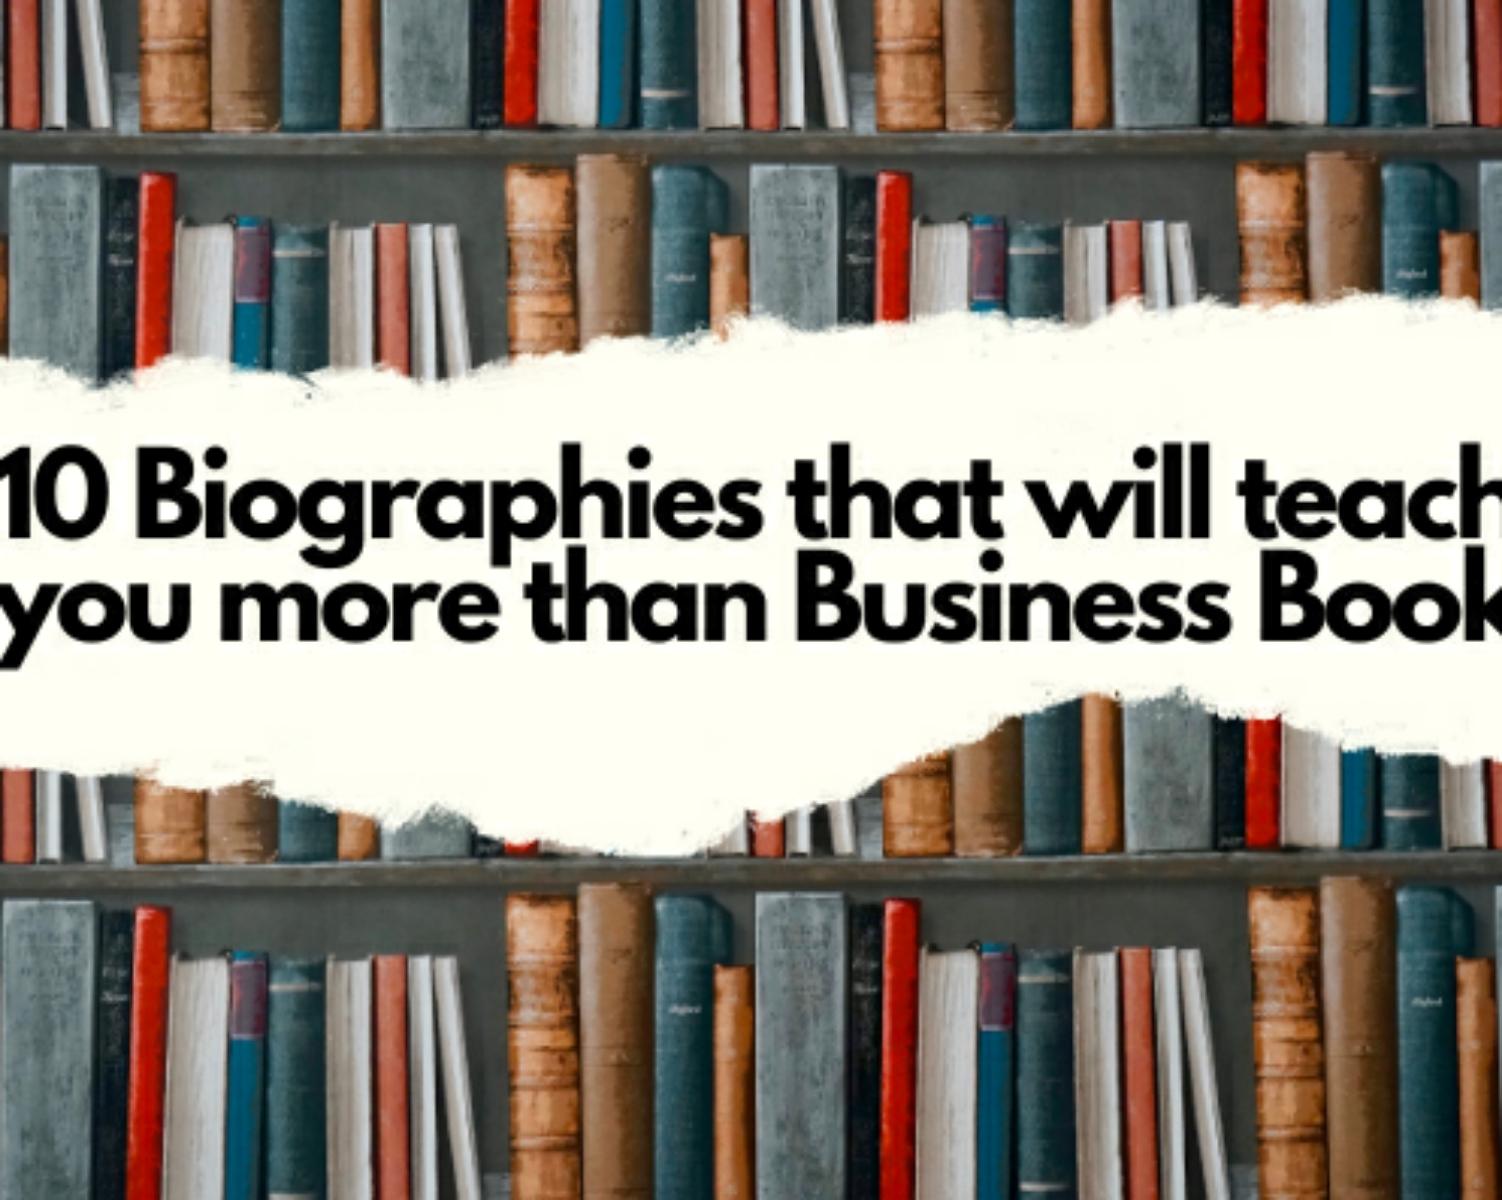 10 Biographies that will teach you more than Business Books